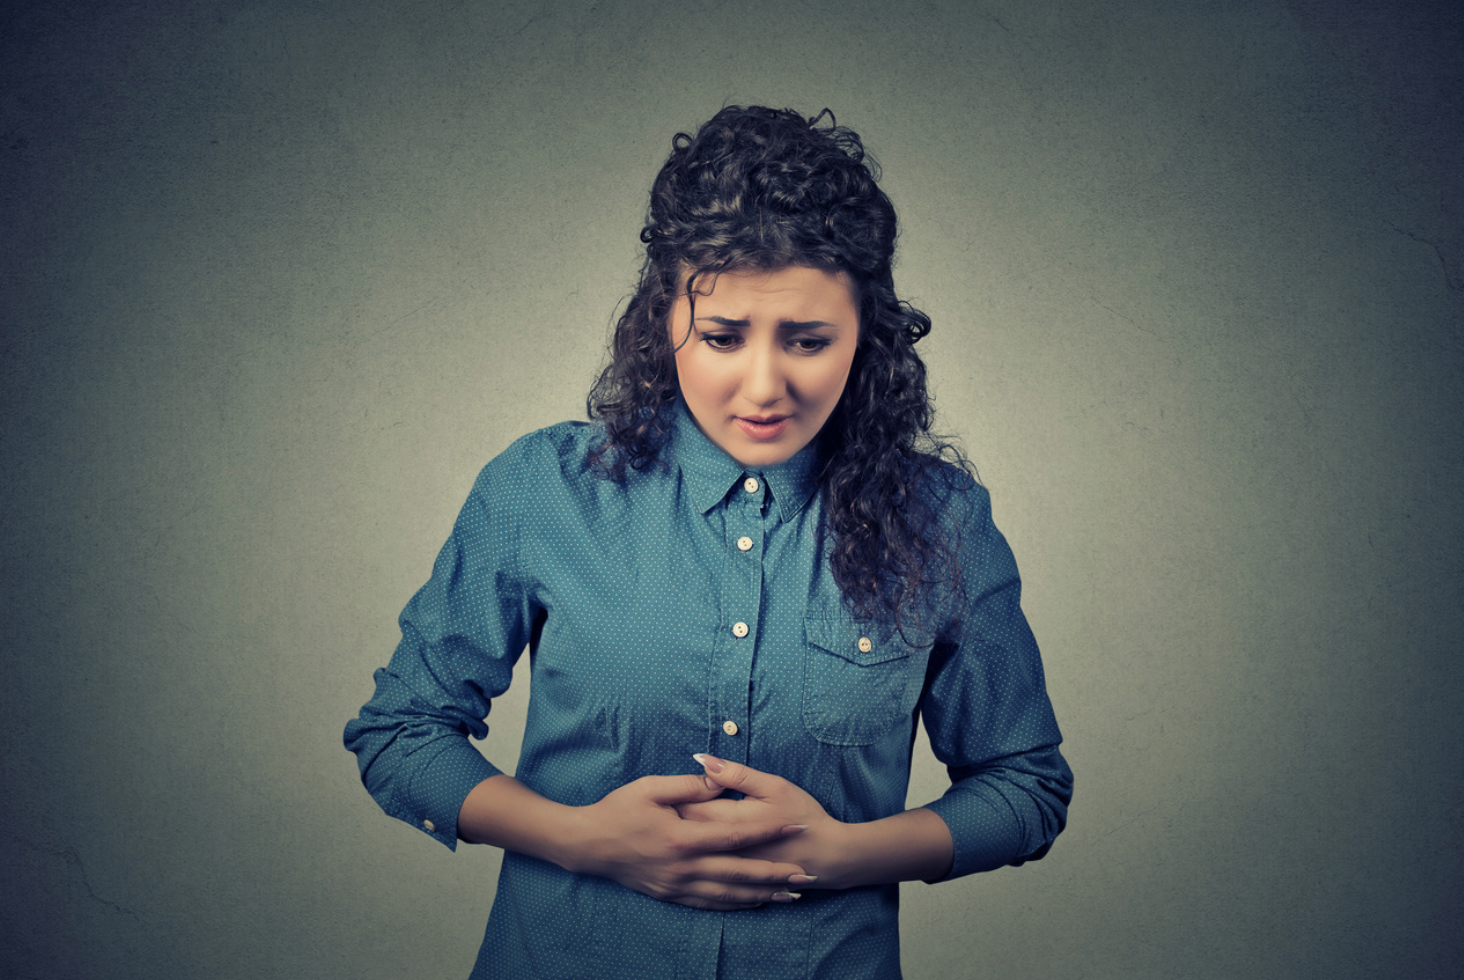 Pharmacist Medication Insights: Lactitol for Chronic Idiopathic Constipation